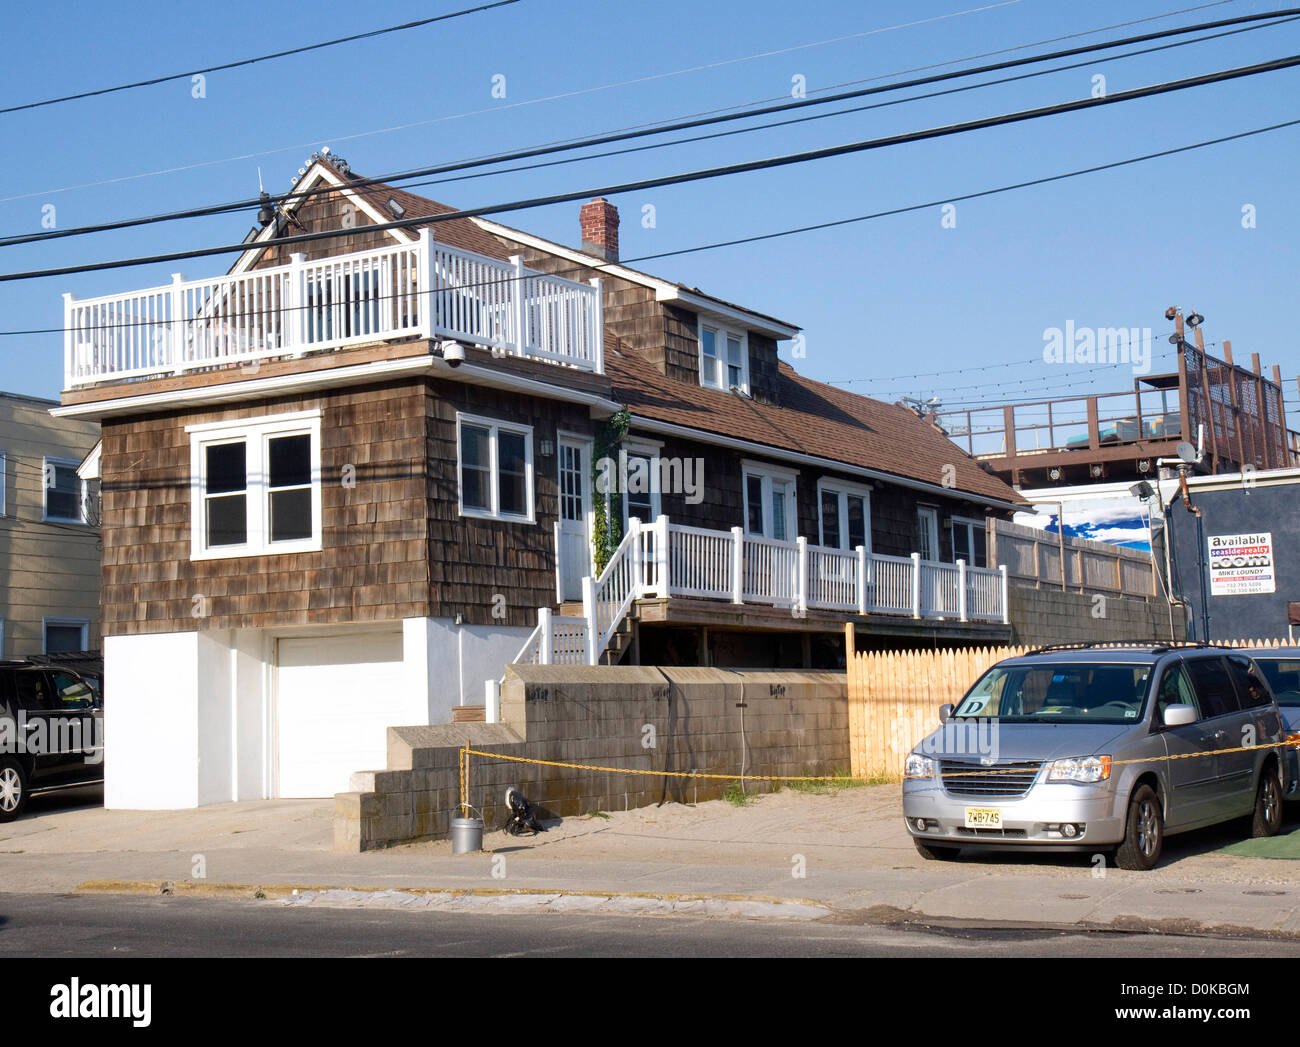 eb familie Gietvorm The 'Jersey Shore' house The cast of MTV's 'Jersey Shore' on location  filming Seaside Heights, New Jersey - 19.08.10 Stock Photo - Alamy